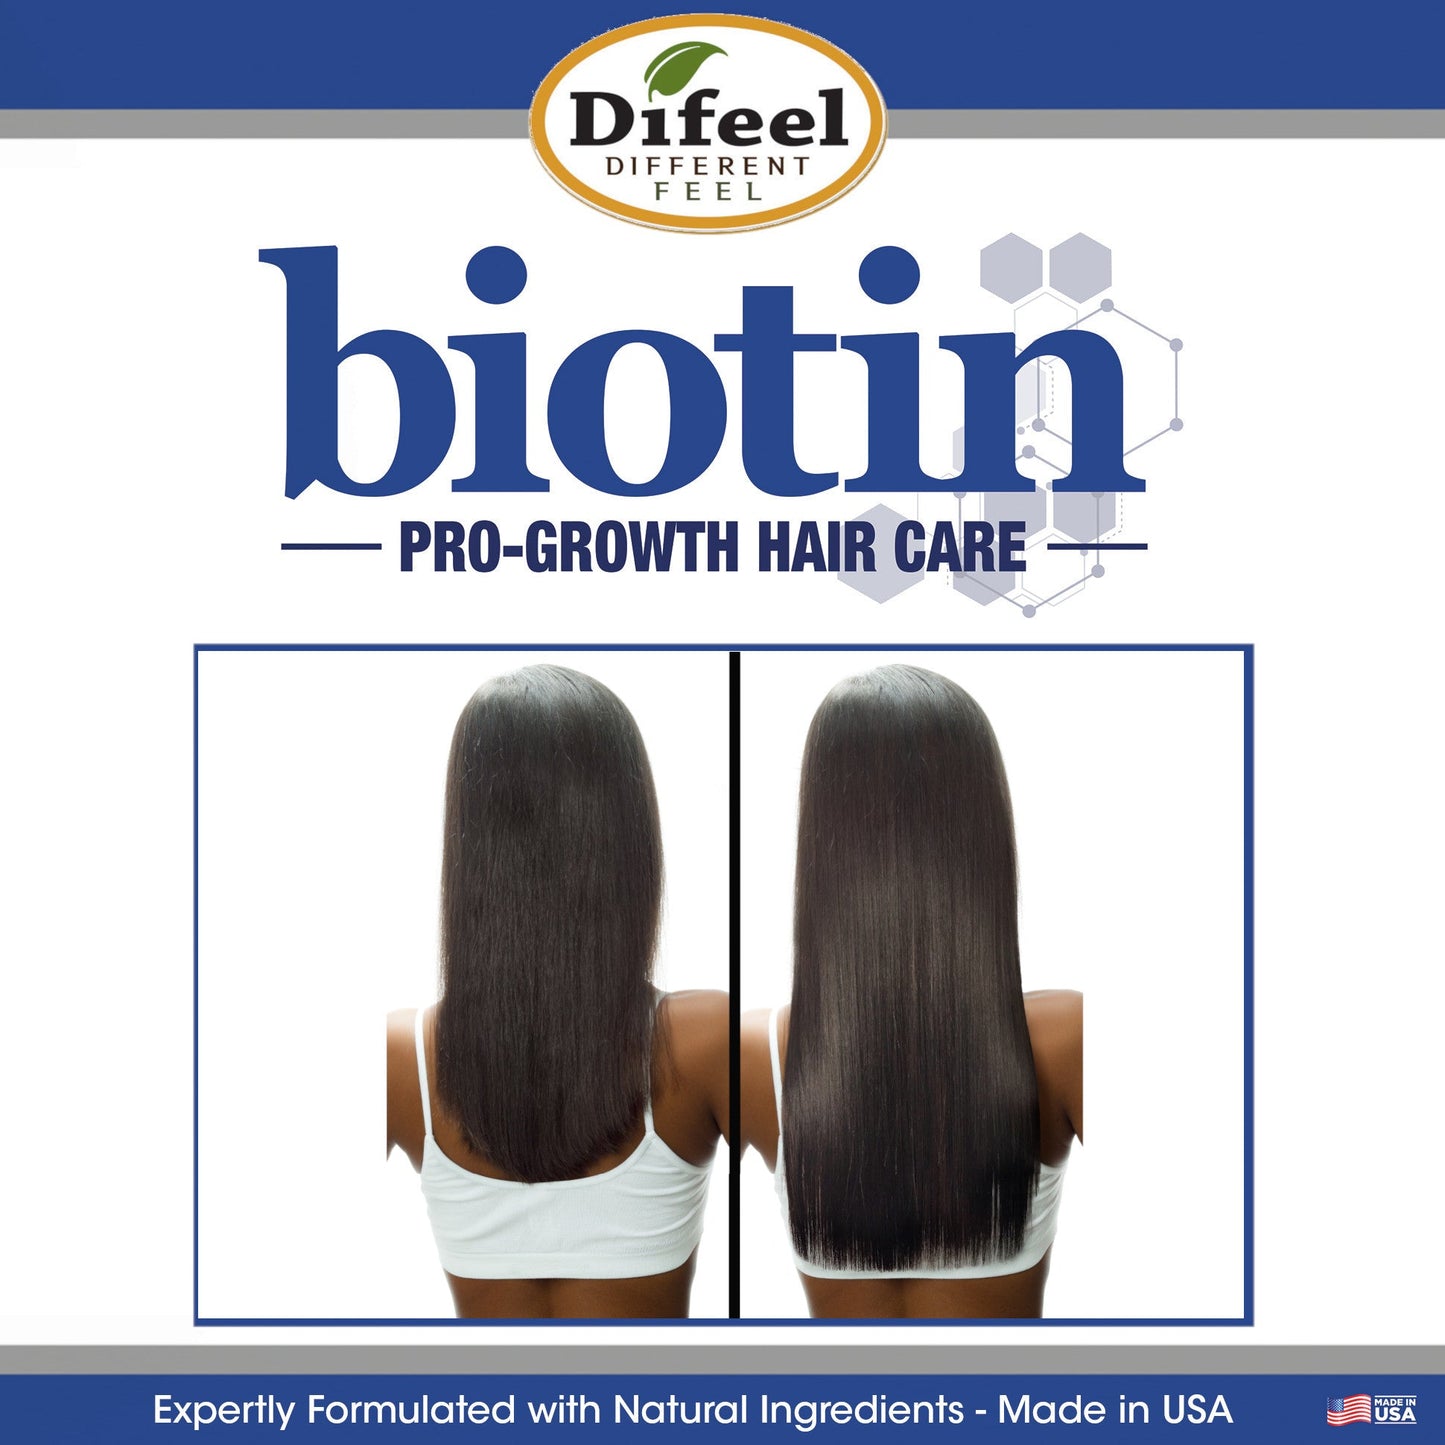 Difeel Biotin Pro-Growth Conditioner for Hair Growth 12 oz. by difeel - find your natural beauty